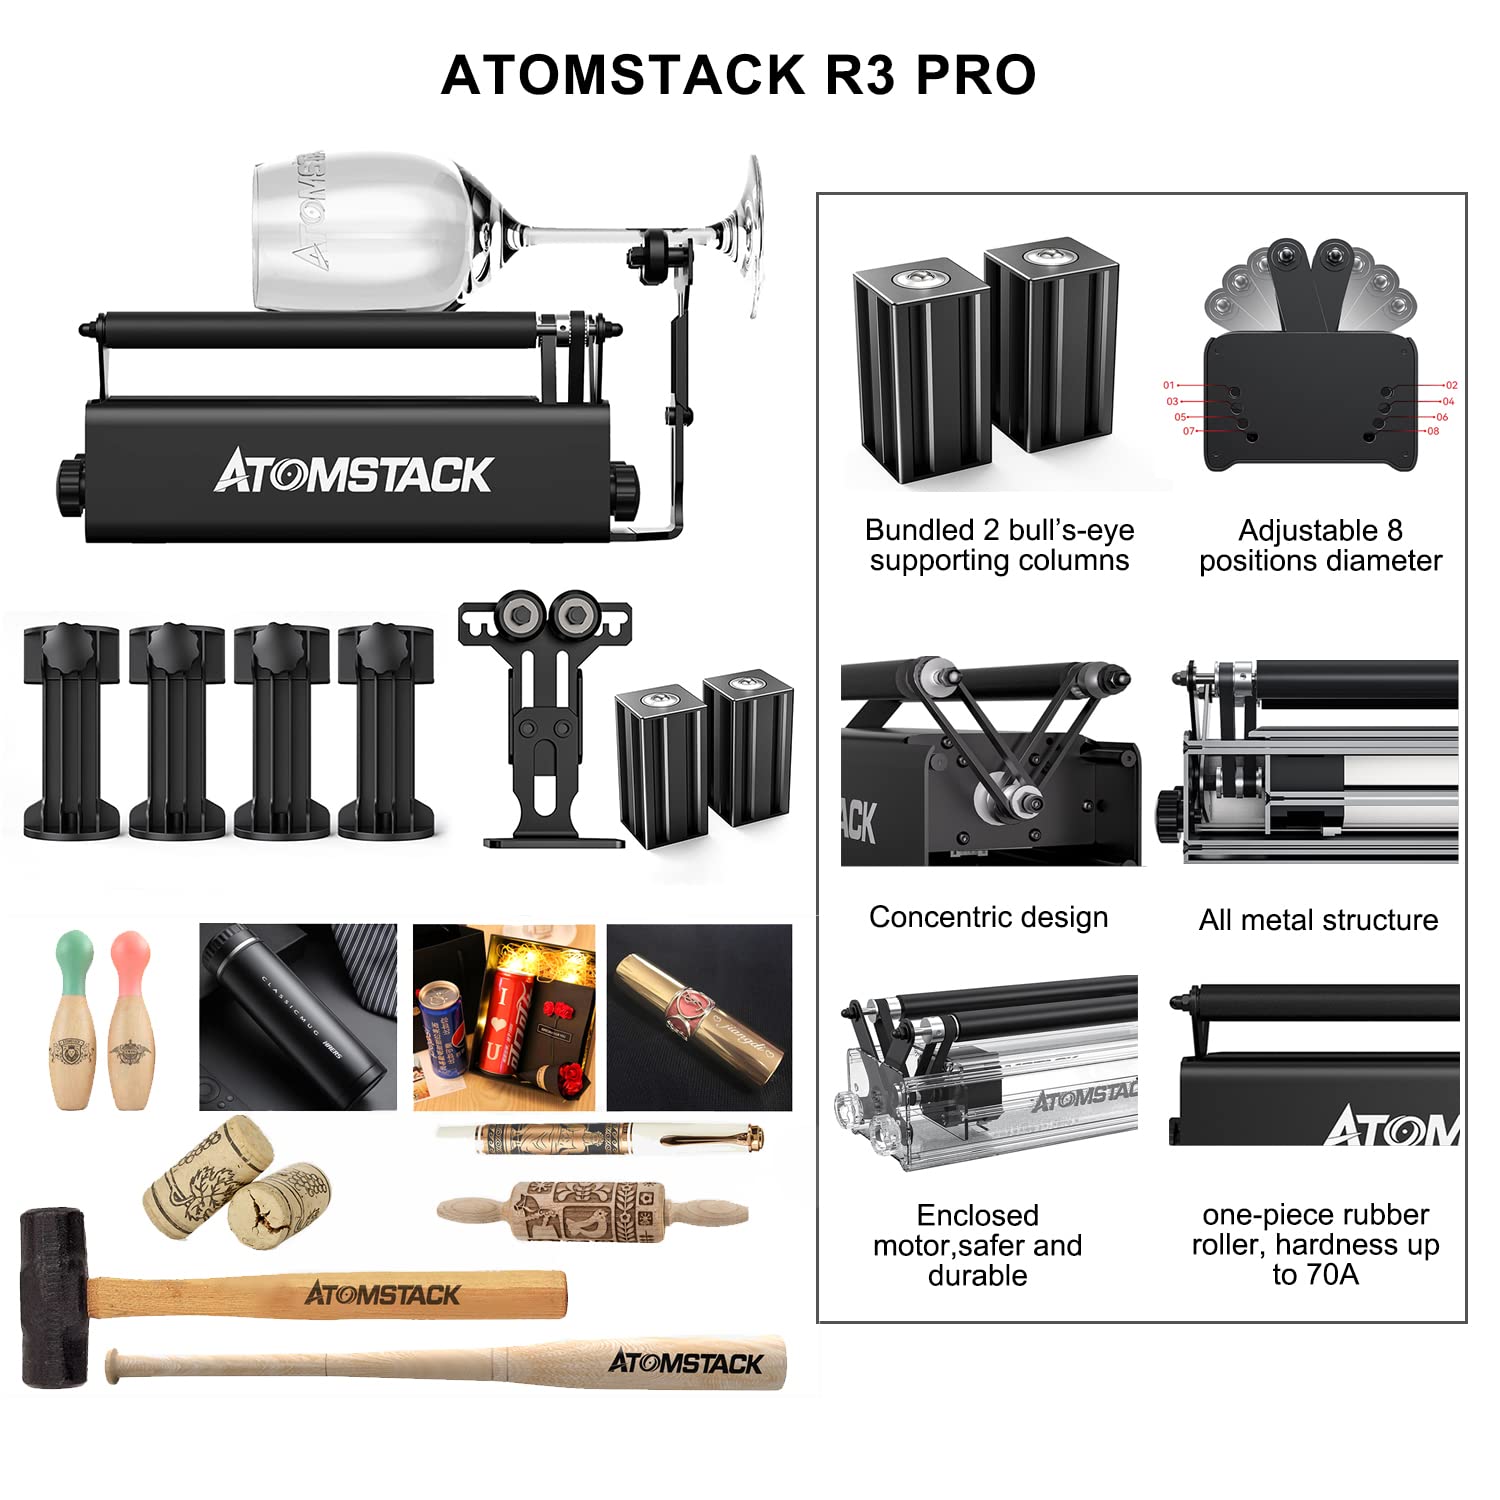 ATOMSTACK A30 X30 S30 PRO Laser Engraving Machine With R3 Pro Rotary Roller F30 Pro Air Assist 33W Output Laser Engraver Cutter